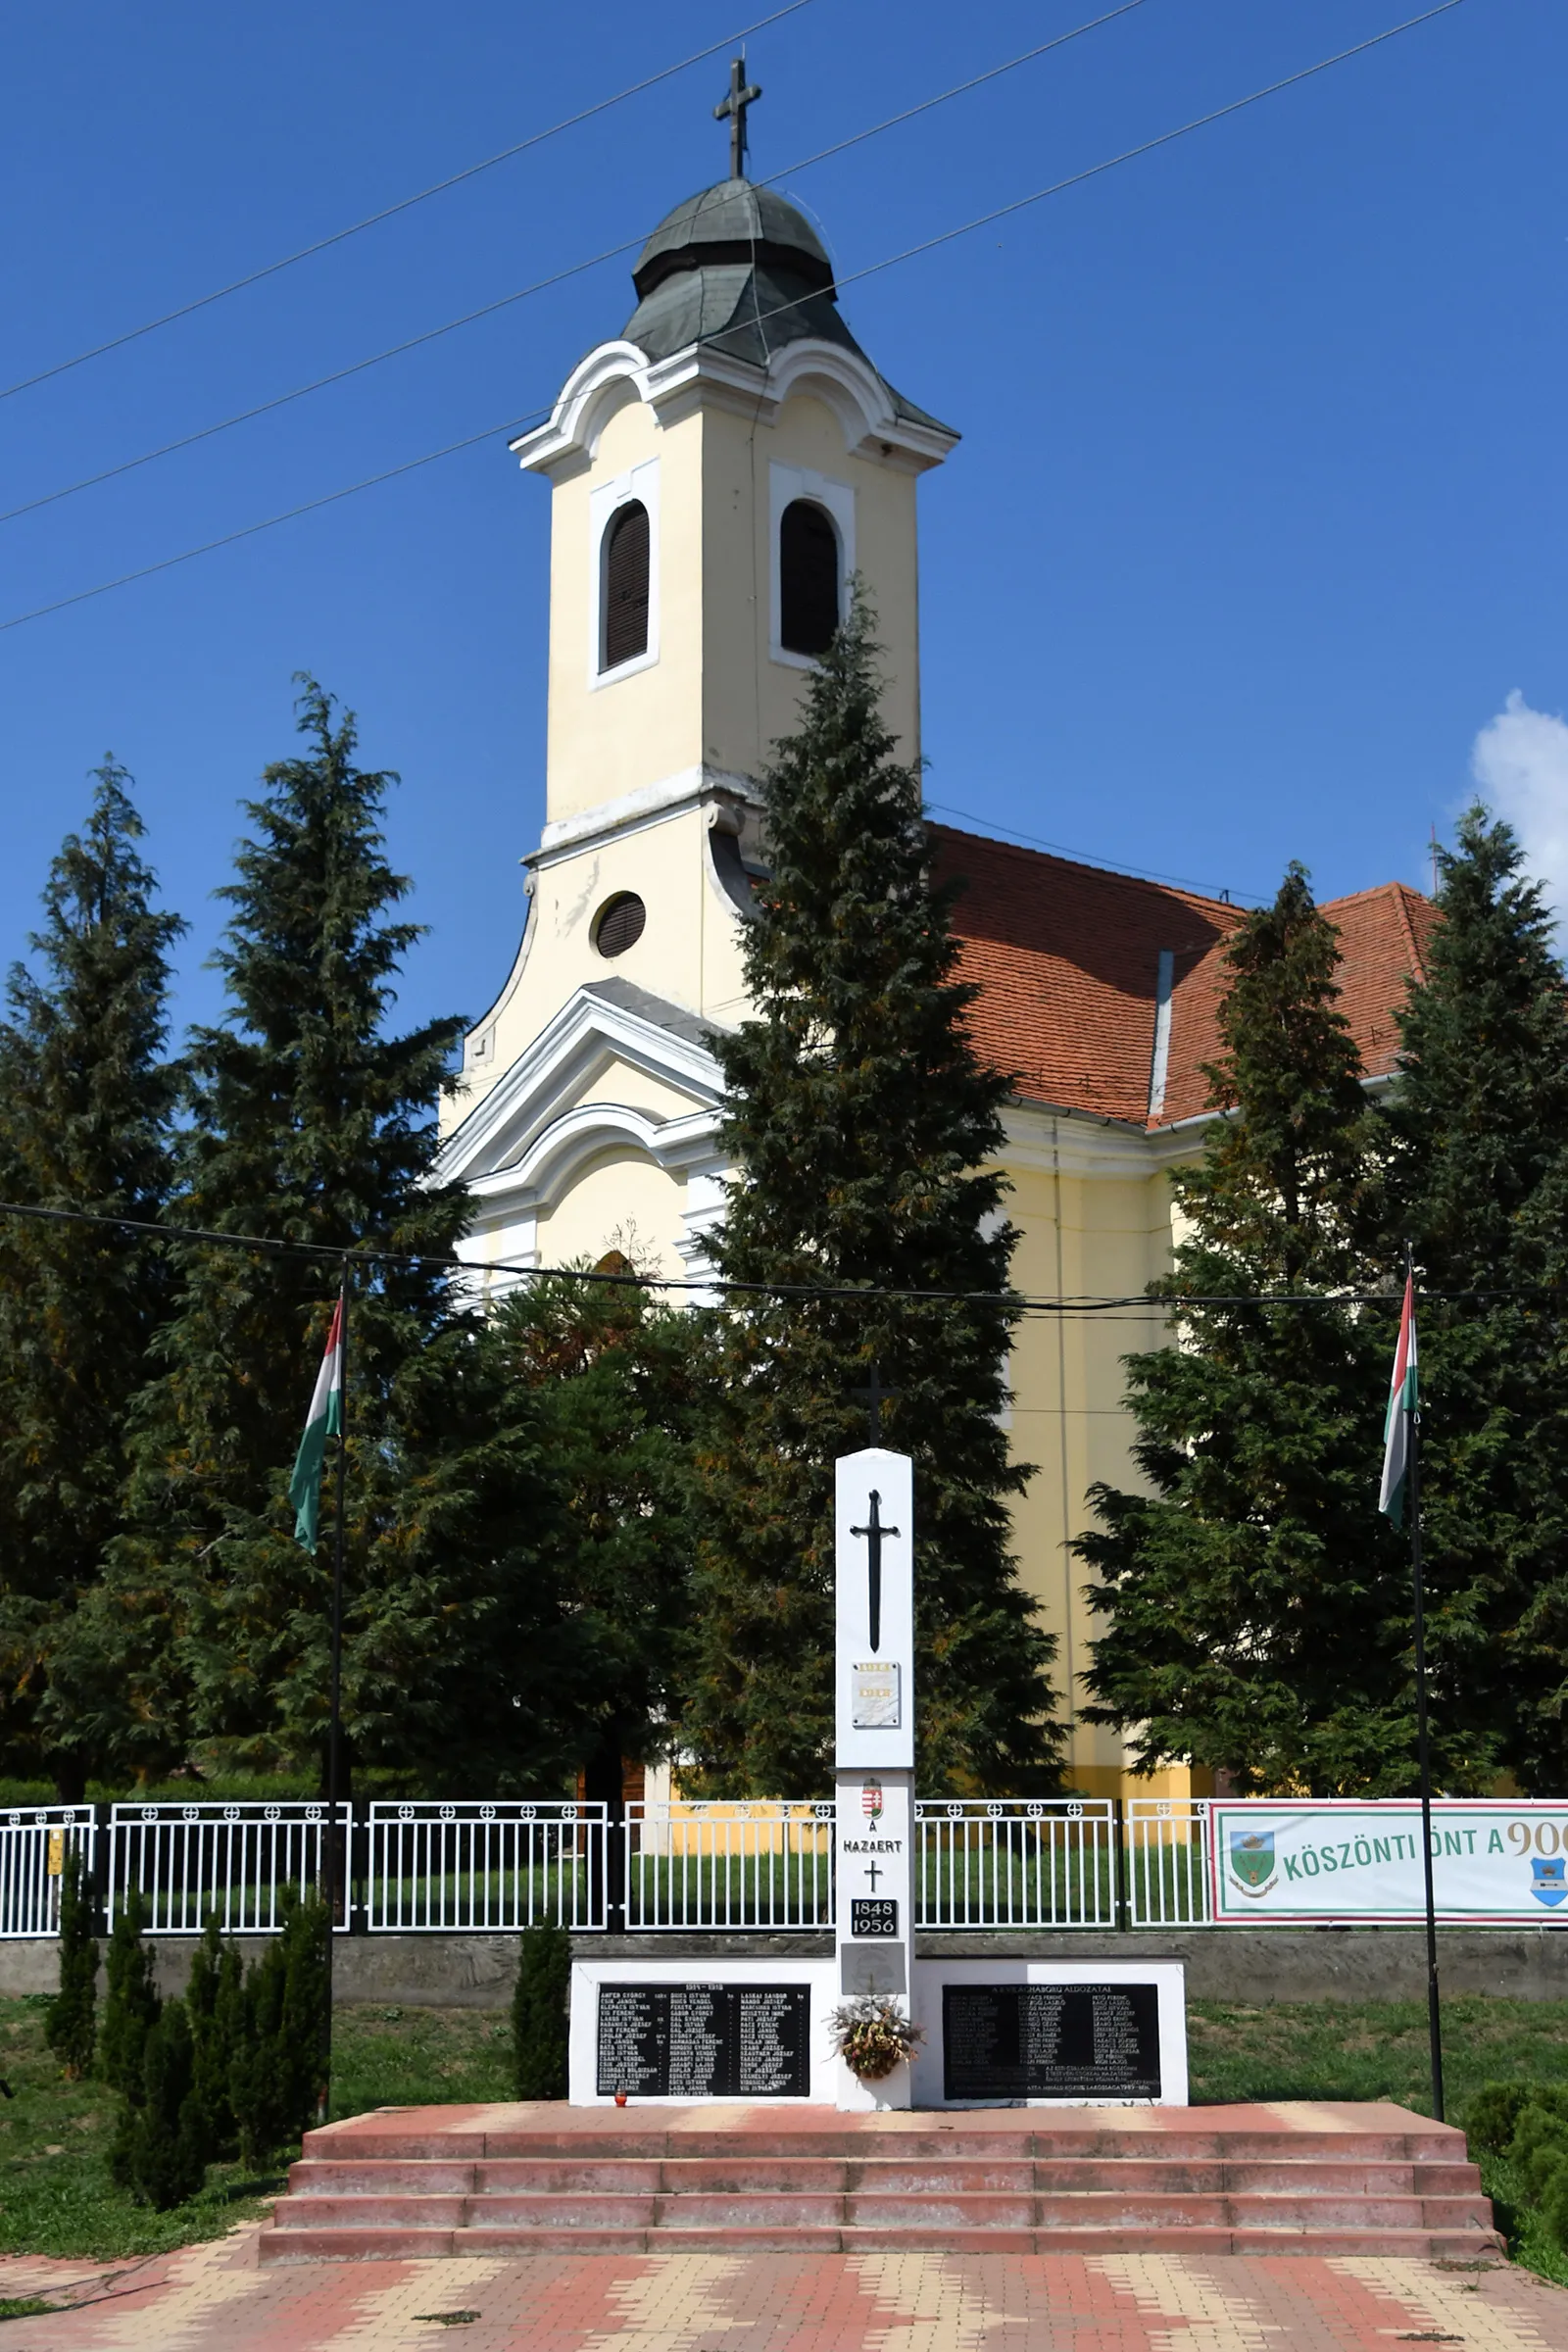 Photo showing: Roman Catholic church in Miháld, Hungary with World Wars memorial in the foreground